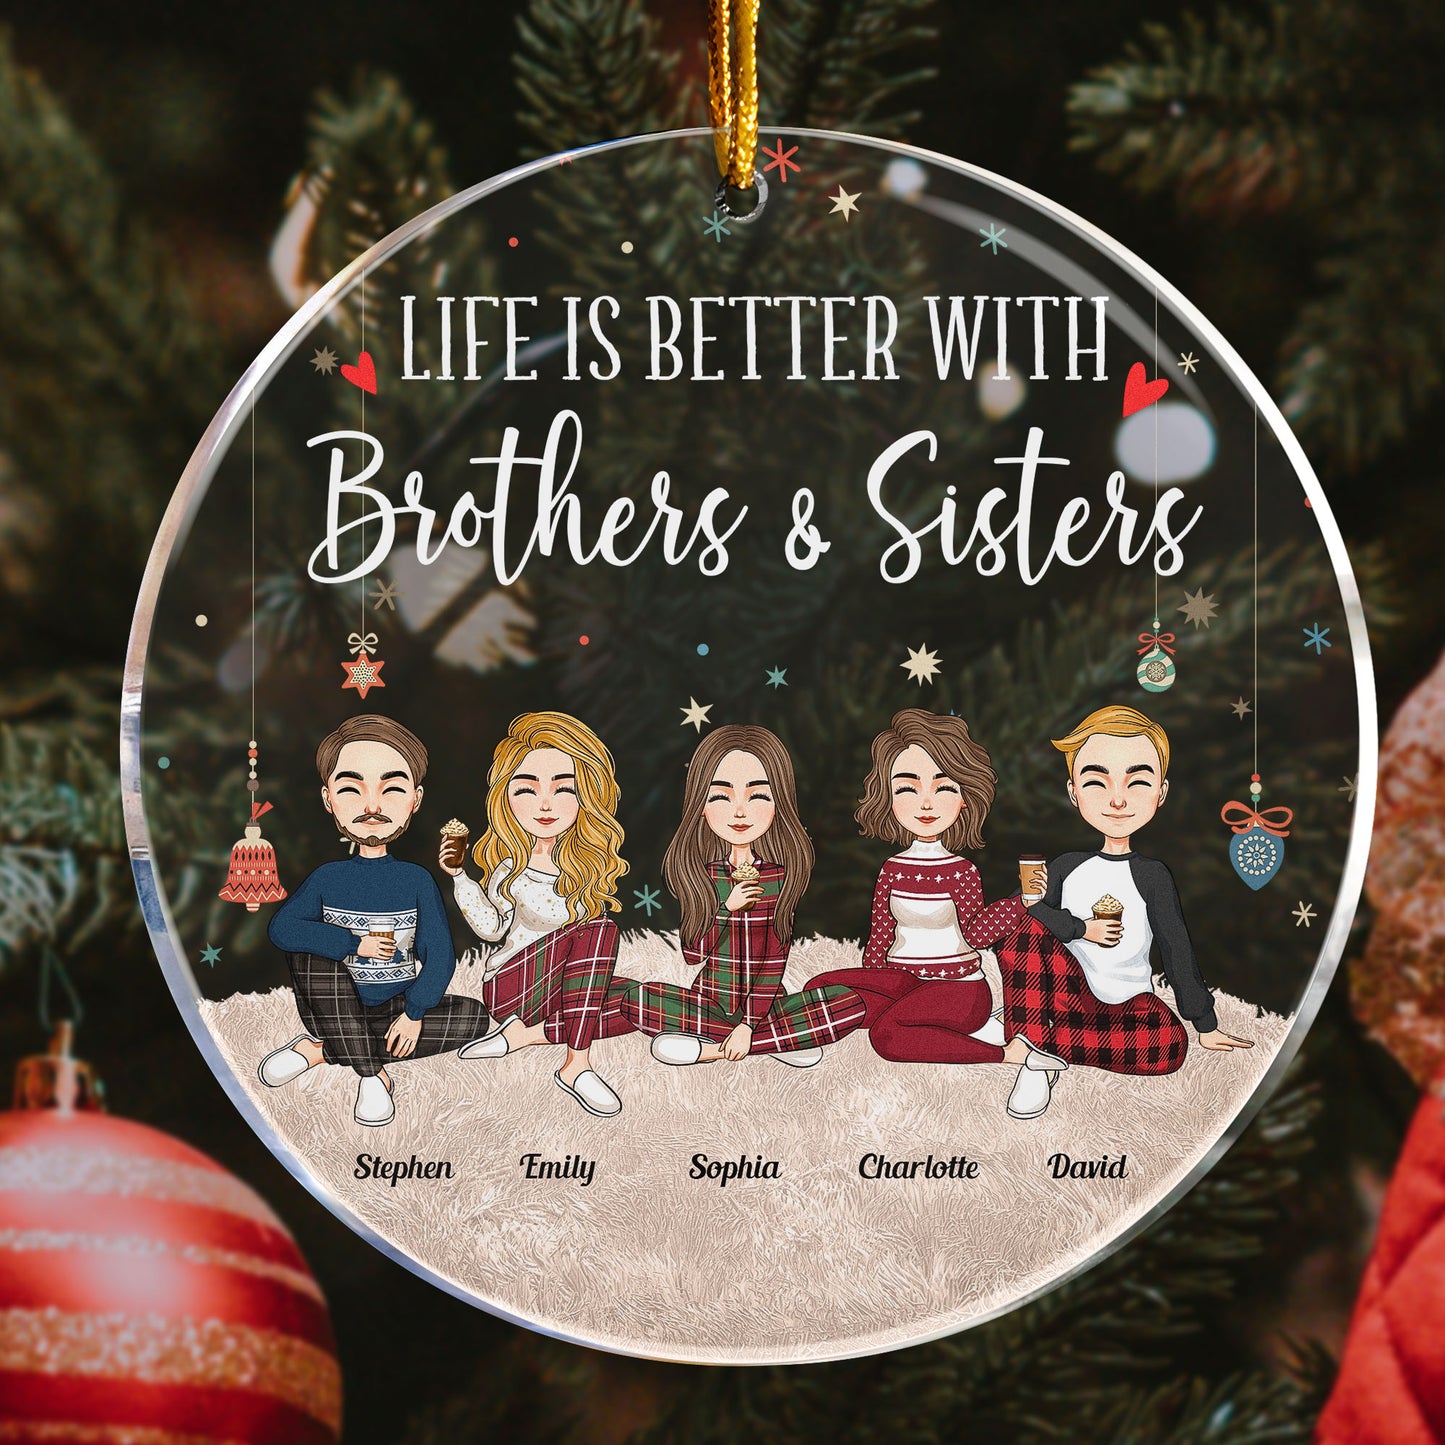 Life Is Better With Brothers & Sisters - Personalized Circle Acrylic Ornament - Christmas, New Year Gift For Family, Sisters, Brothers, Siblings